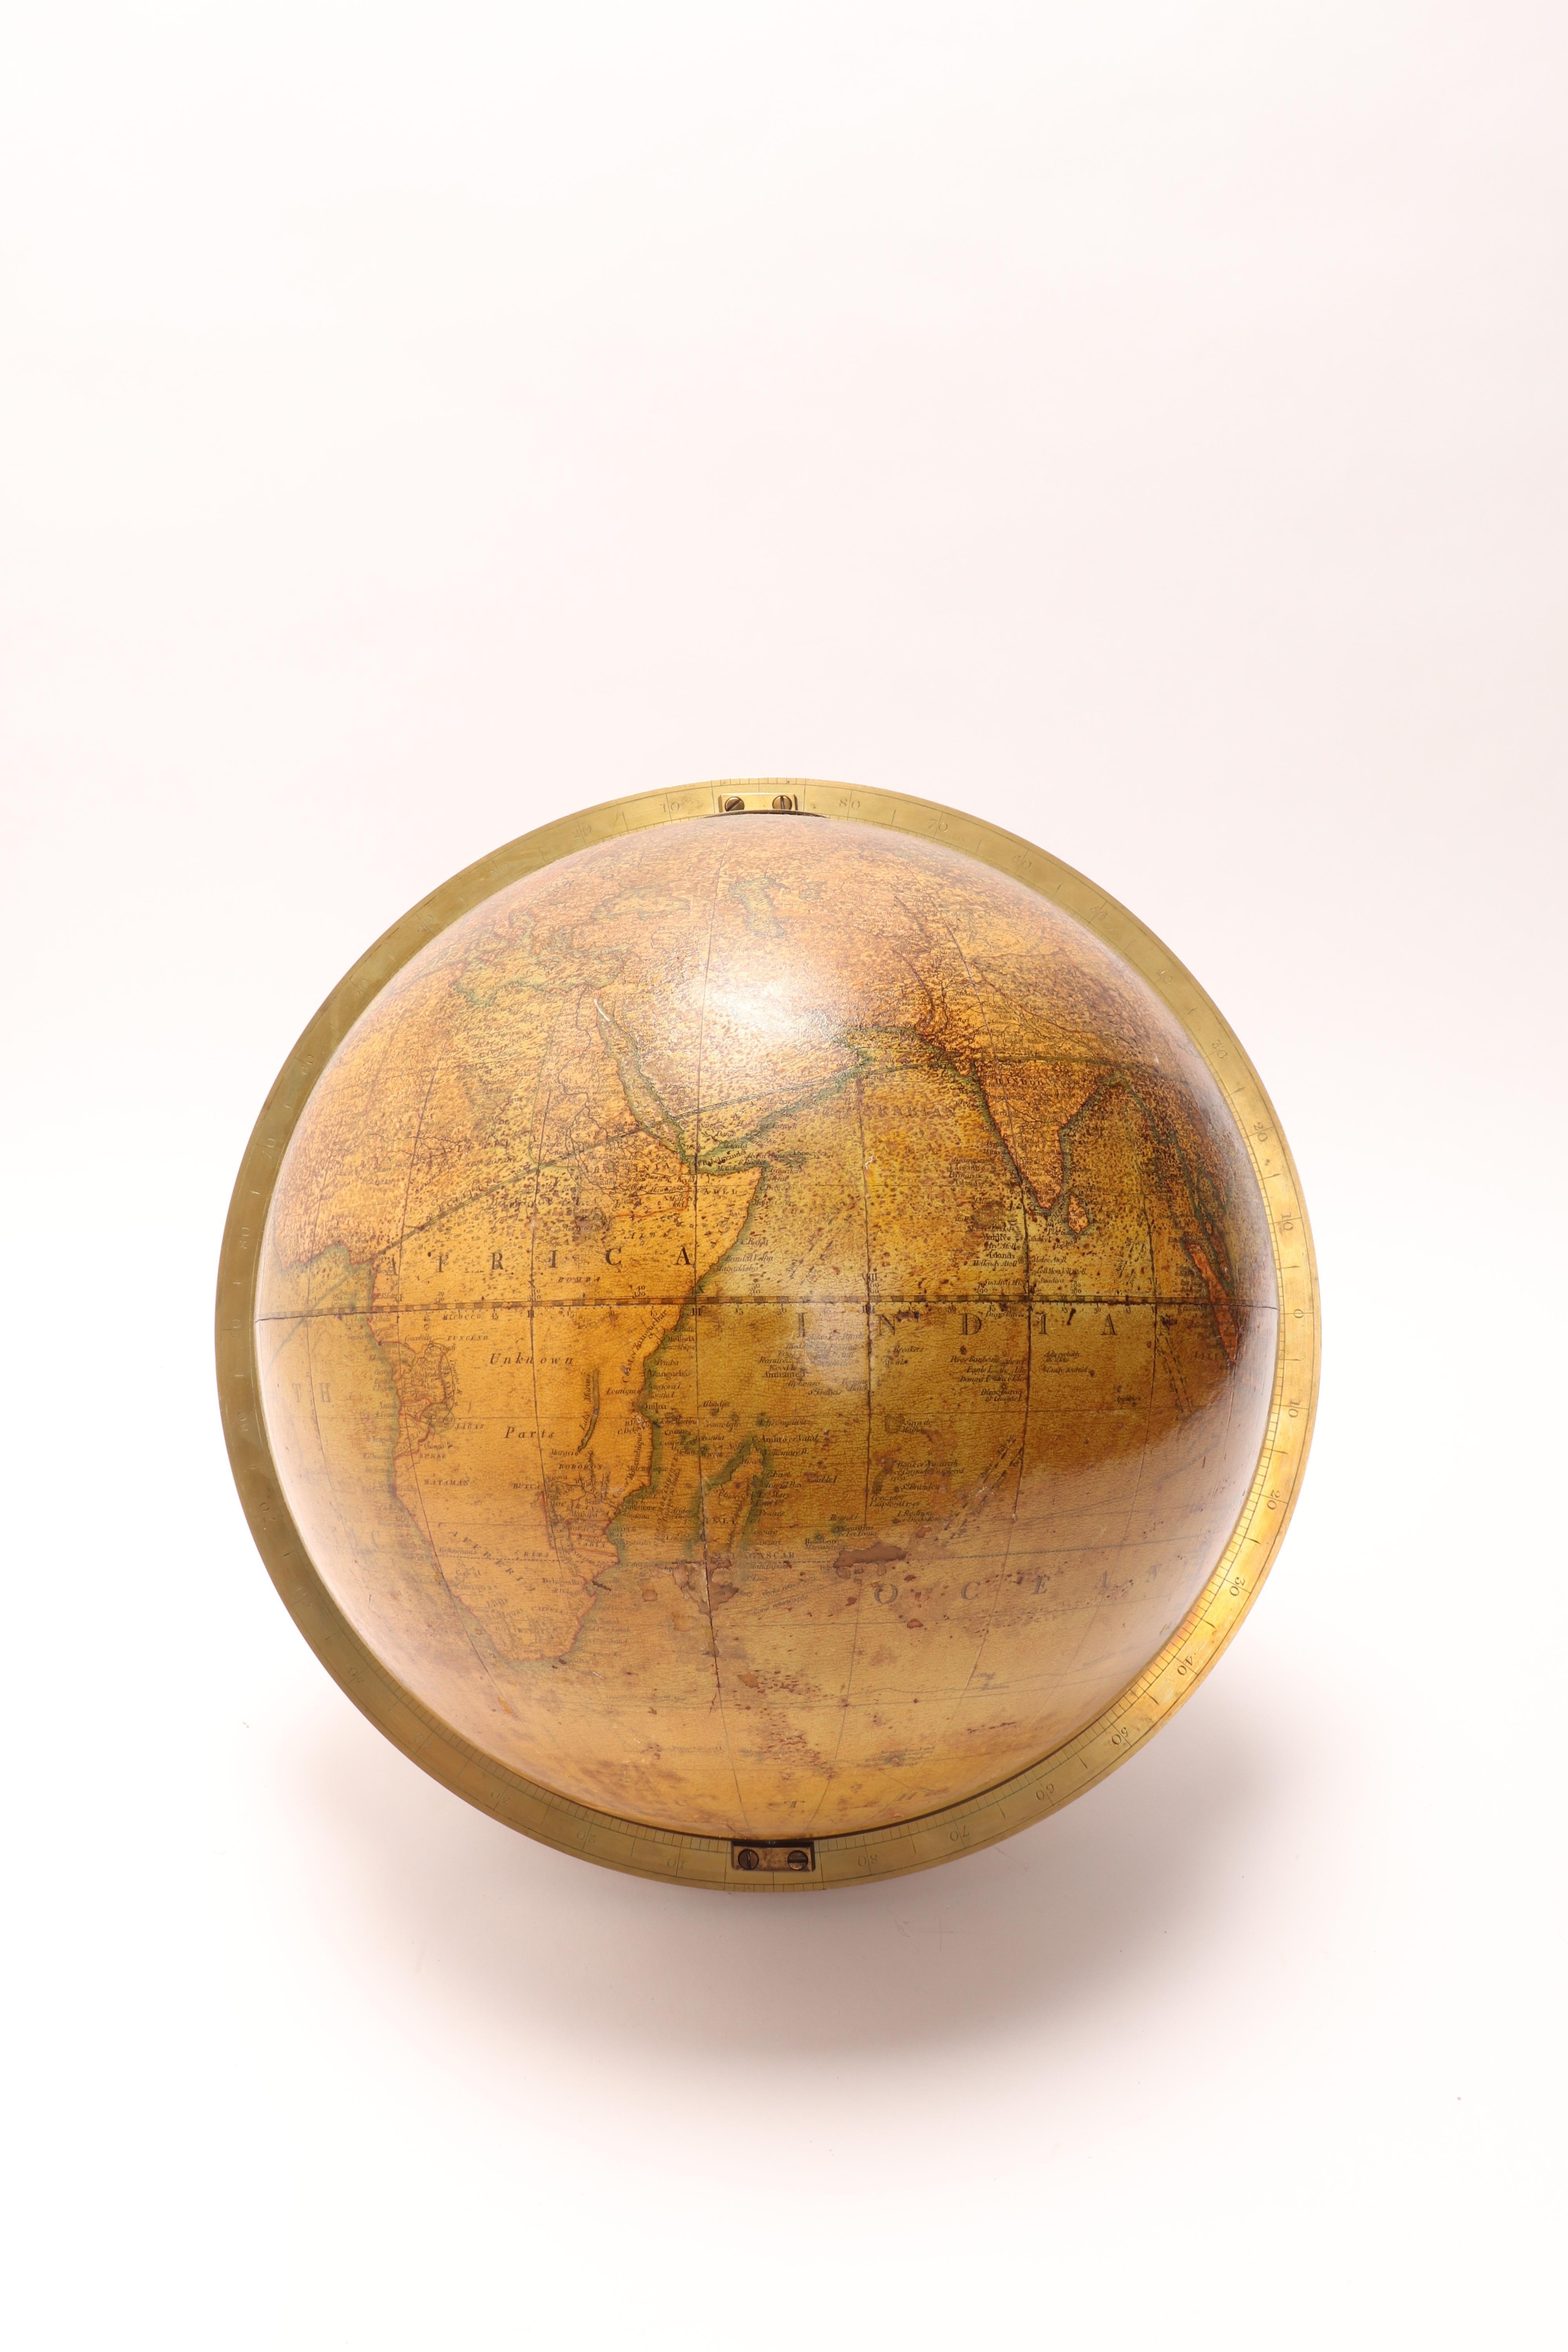 Terrestrial Globe Signed Cary, London, 1800 1